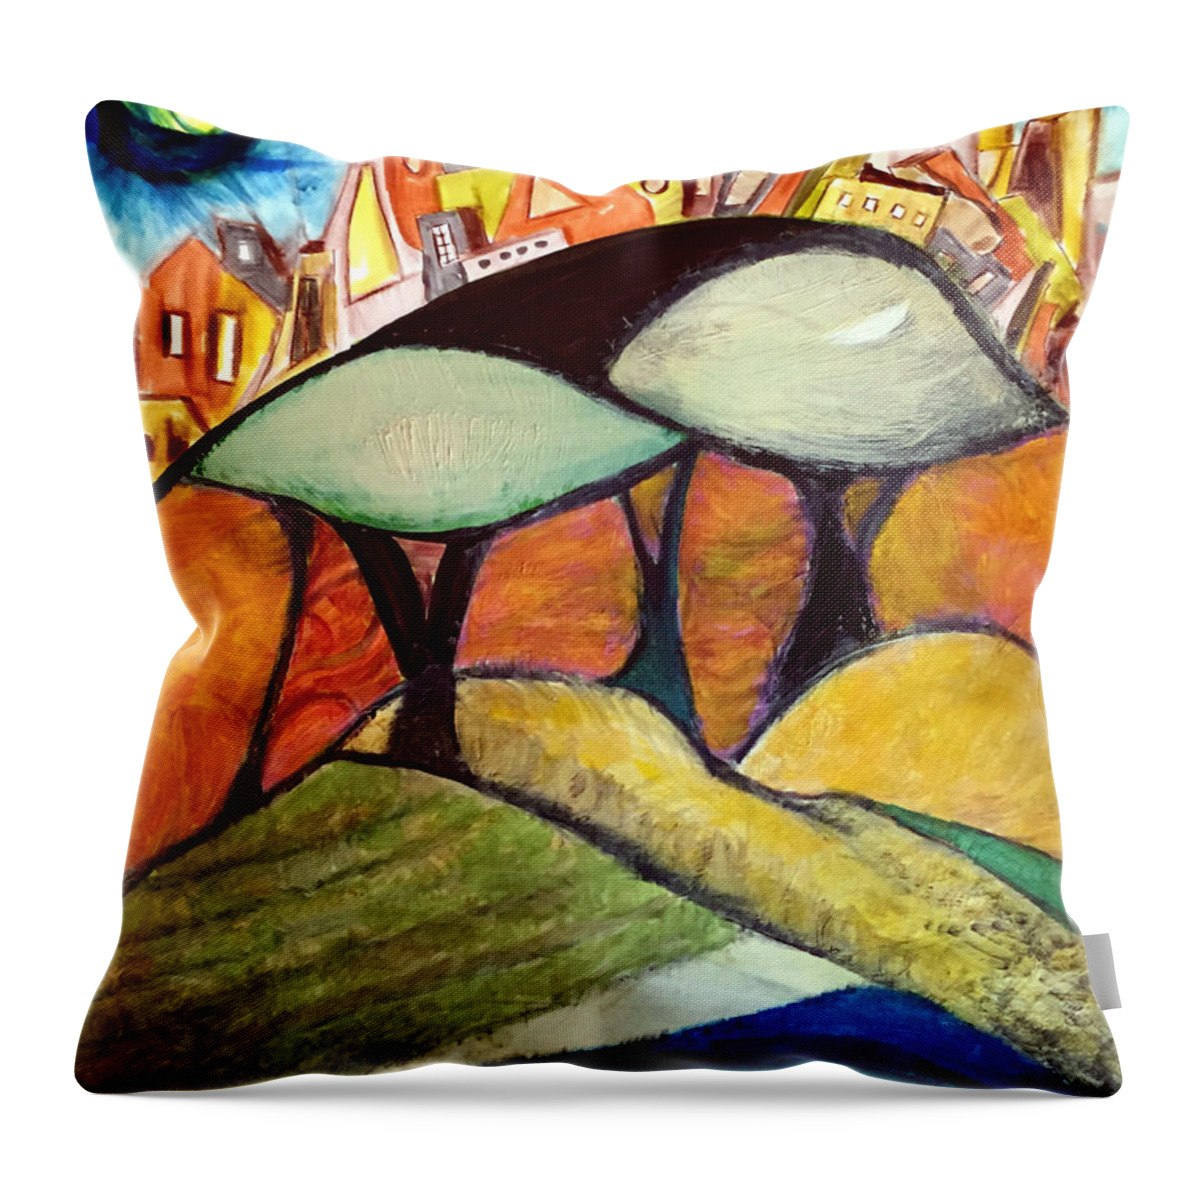 Impressionist Throw Pillow featuring the painting Imaginary Roadside Mushroom Trees by Dennis Ellman